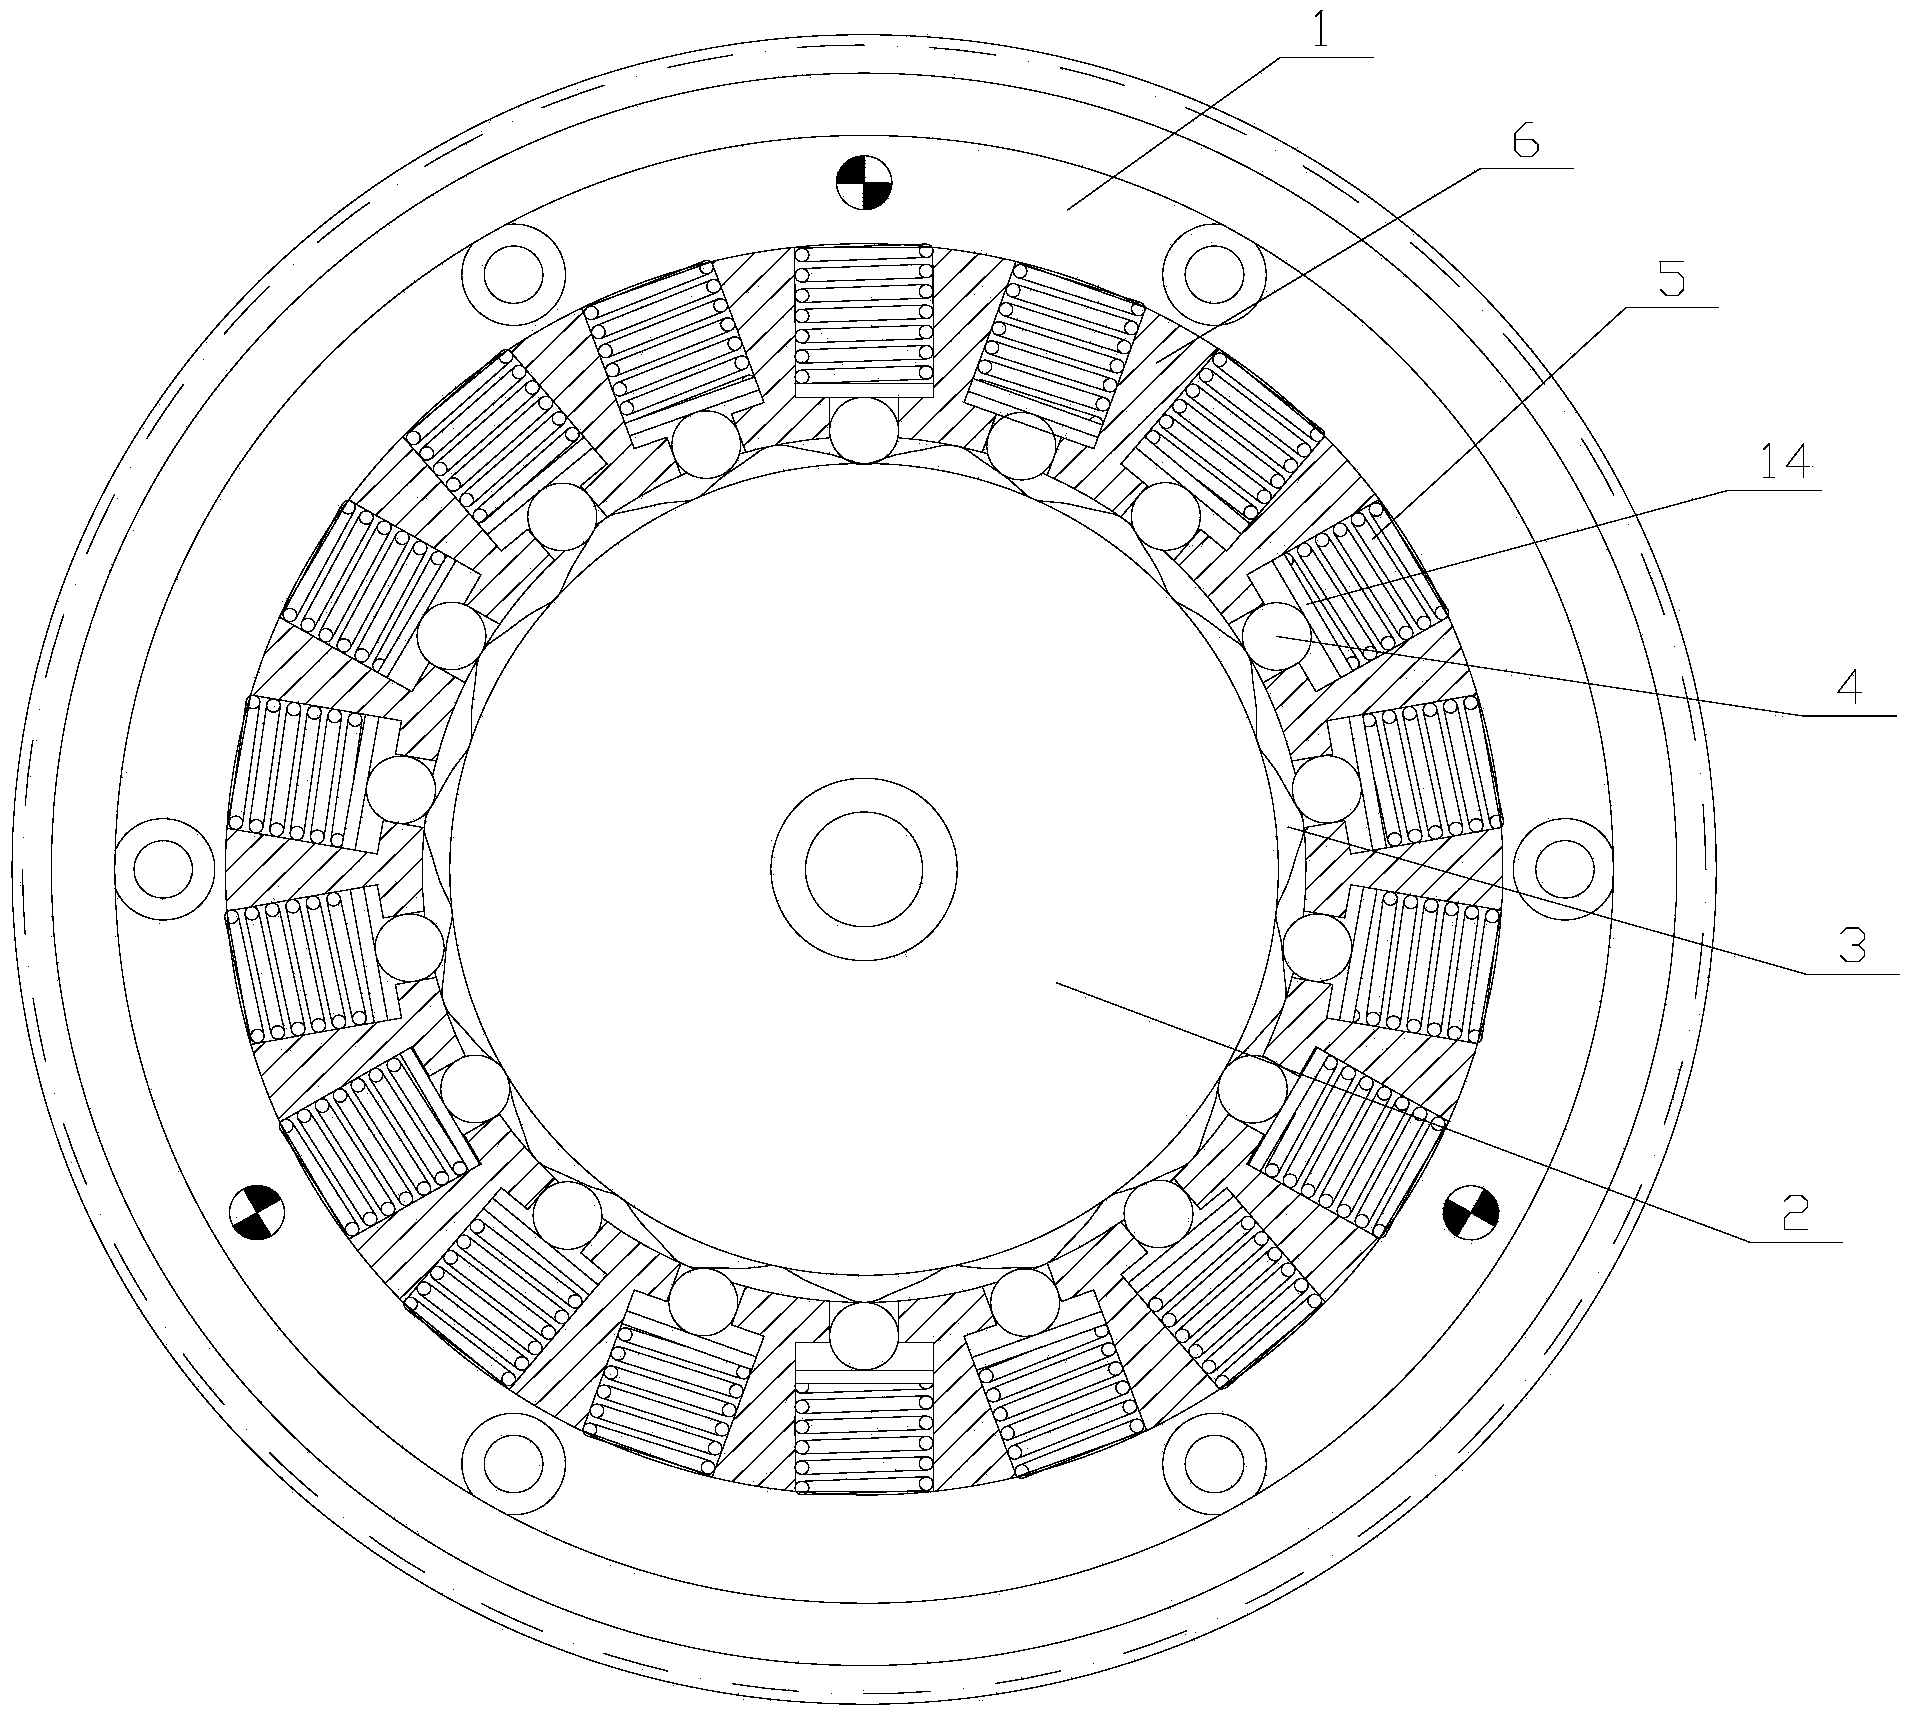 Non-friction clutch